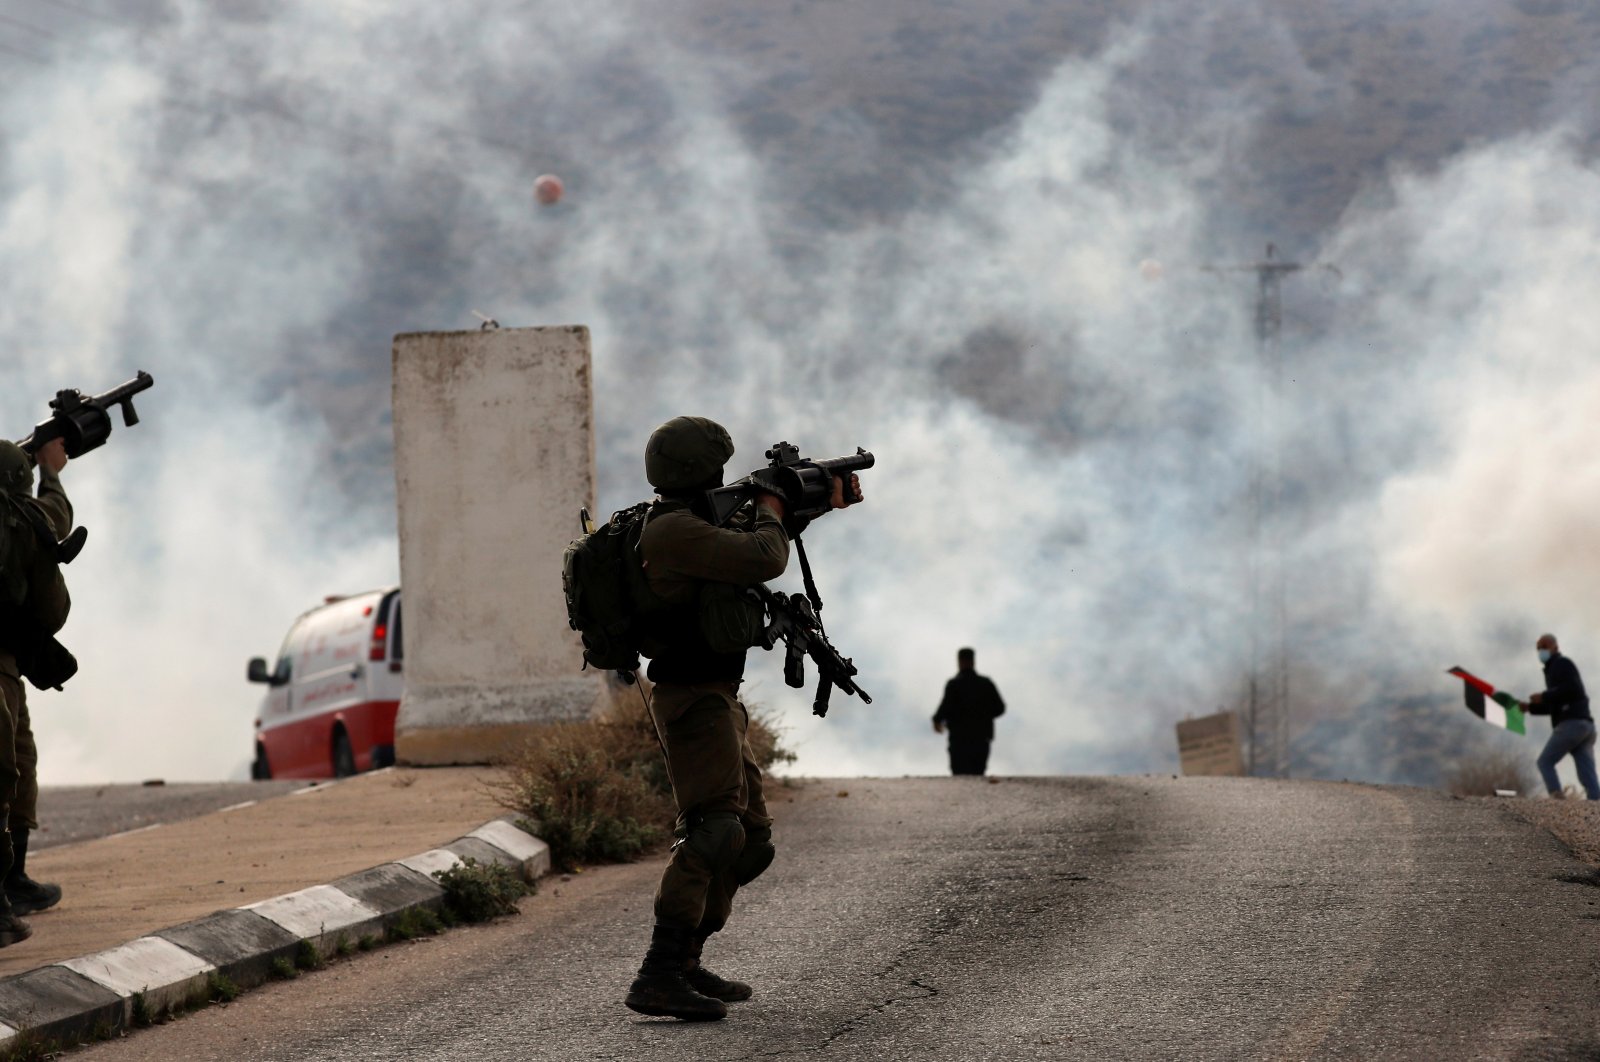 An Israeli soldier fires a tear gas canister toward Palestinian demonstrators during a protest against Jewish settlements in Jordan Valley in the Israeli-occupied West Bank, Palestine, Nov. 24, 2020. (Reuters Photo)